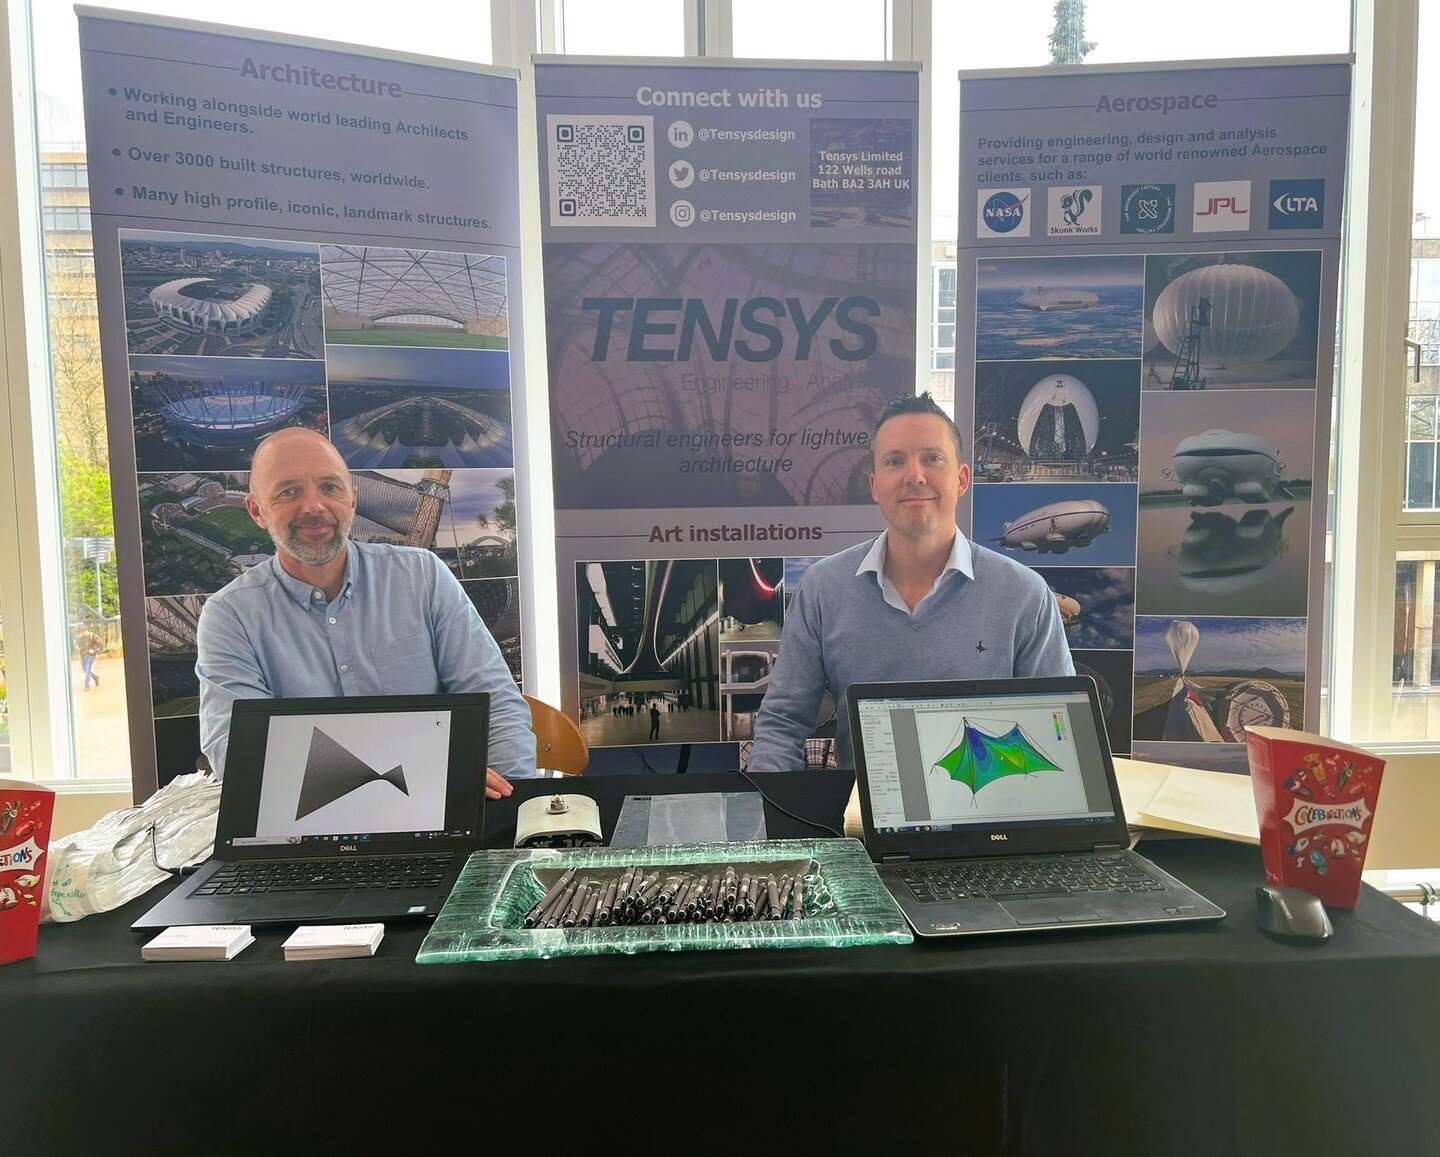 Tensys were thrilled to present a stand at the @uniofbath careers fair April 2023. It was a pleasure to speak to up-and-coming young engineers and discuss the exciting array of projects that Tensys is involved with worldwide.

At Tensys, we are alway